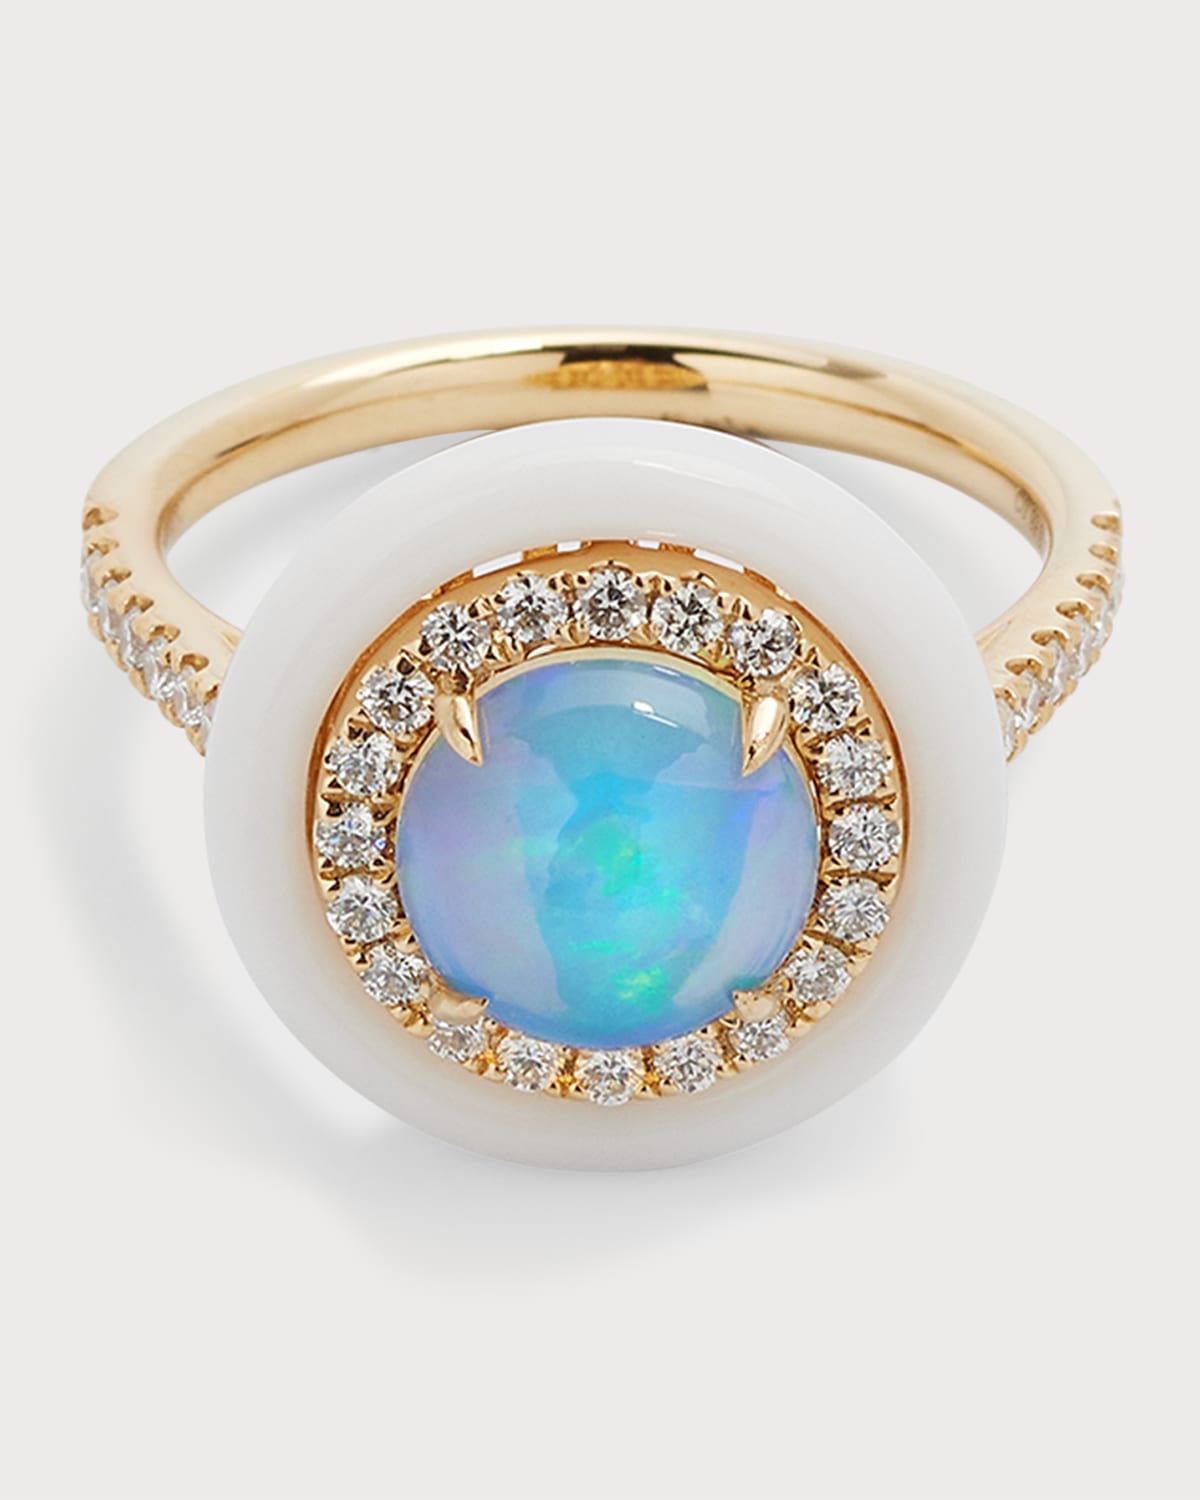 18K Yellow Gold Ring with Round Opal, Diamonds and White Frame, 0.99tcw, Size 7